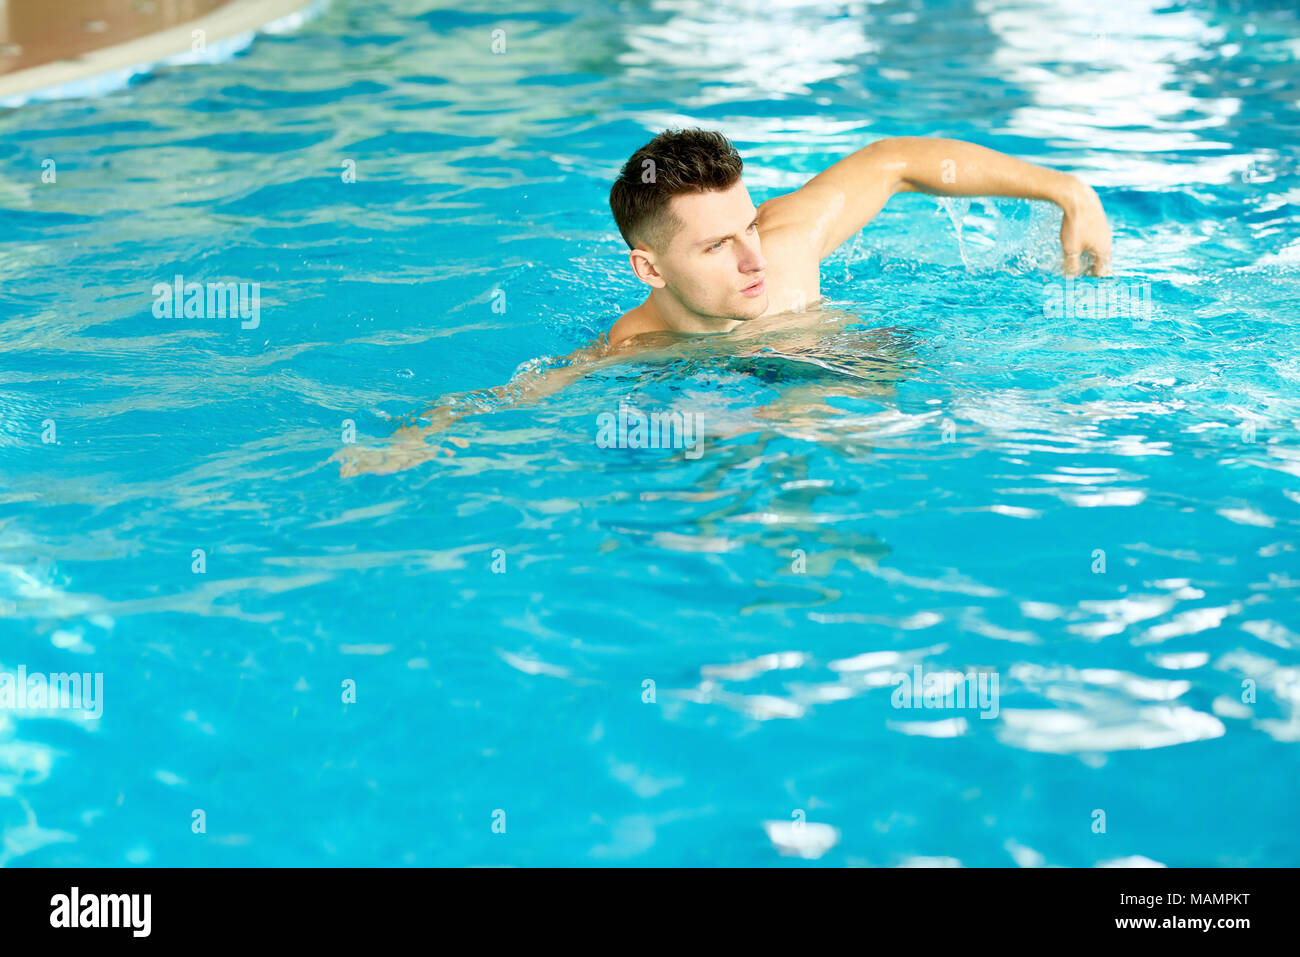 Handsome Man swimming in Pool Banque D'Images